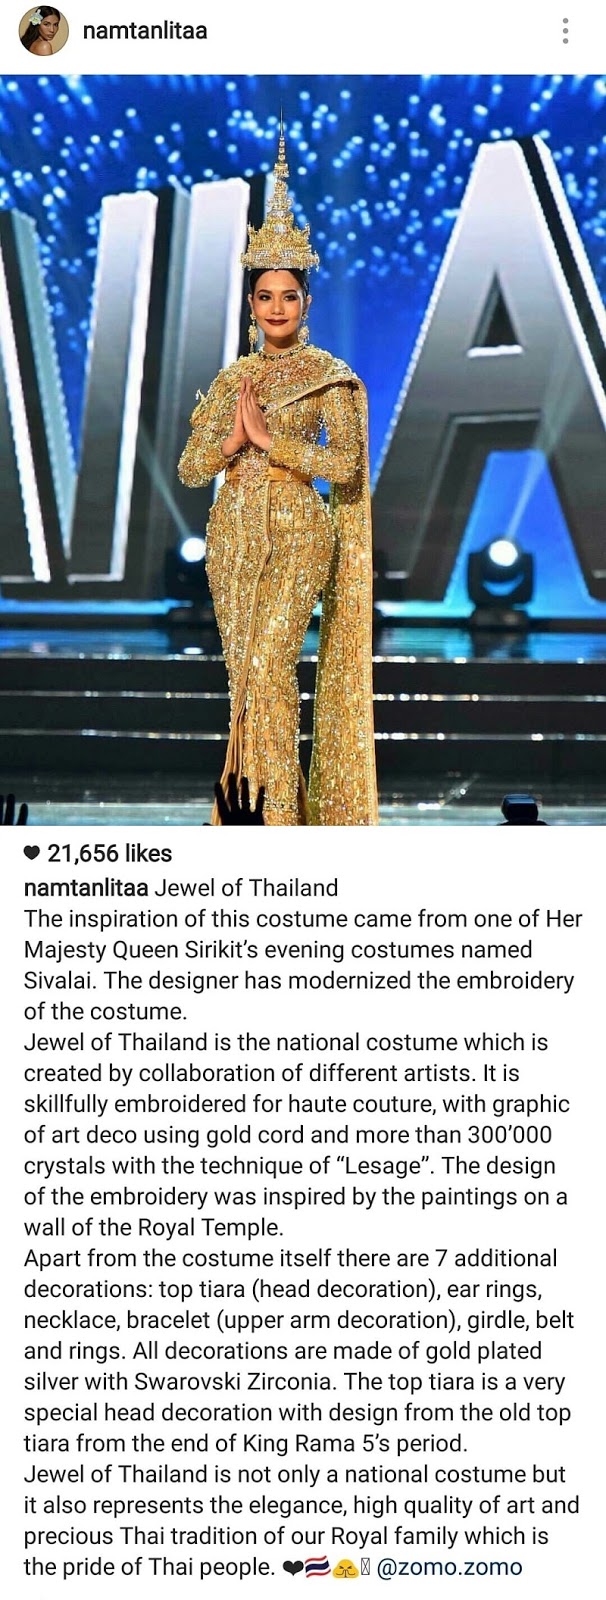 The Jewel of Thailand - National Costume for Chalita Suansane